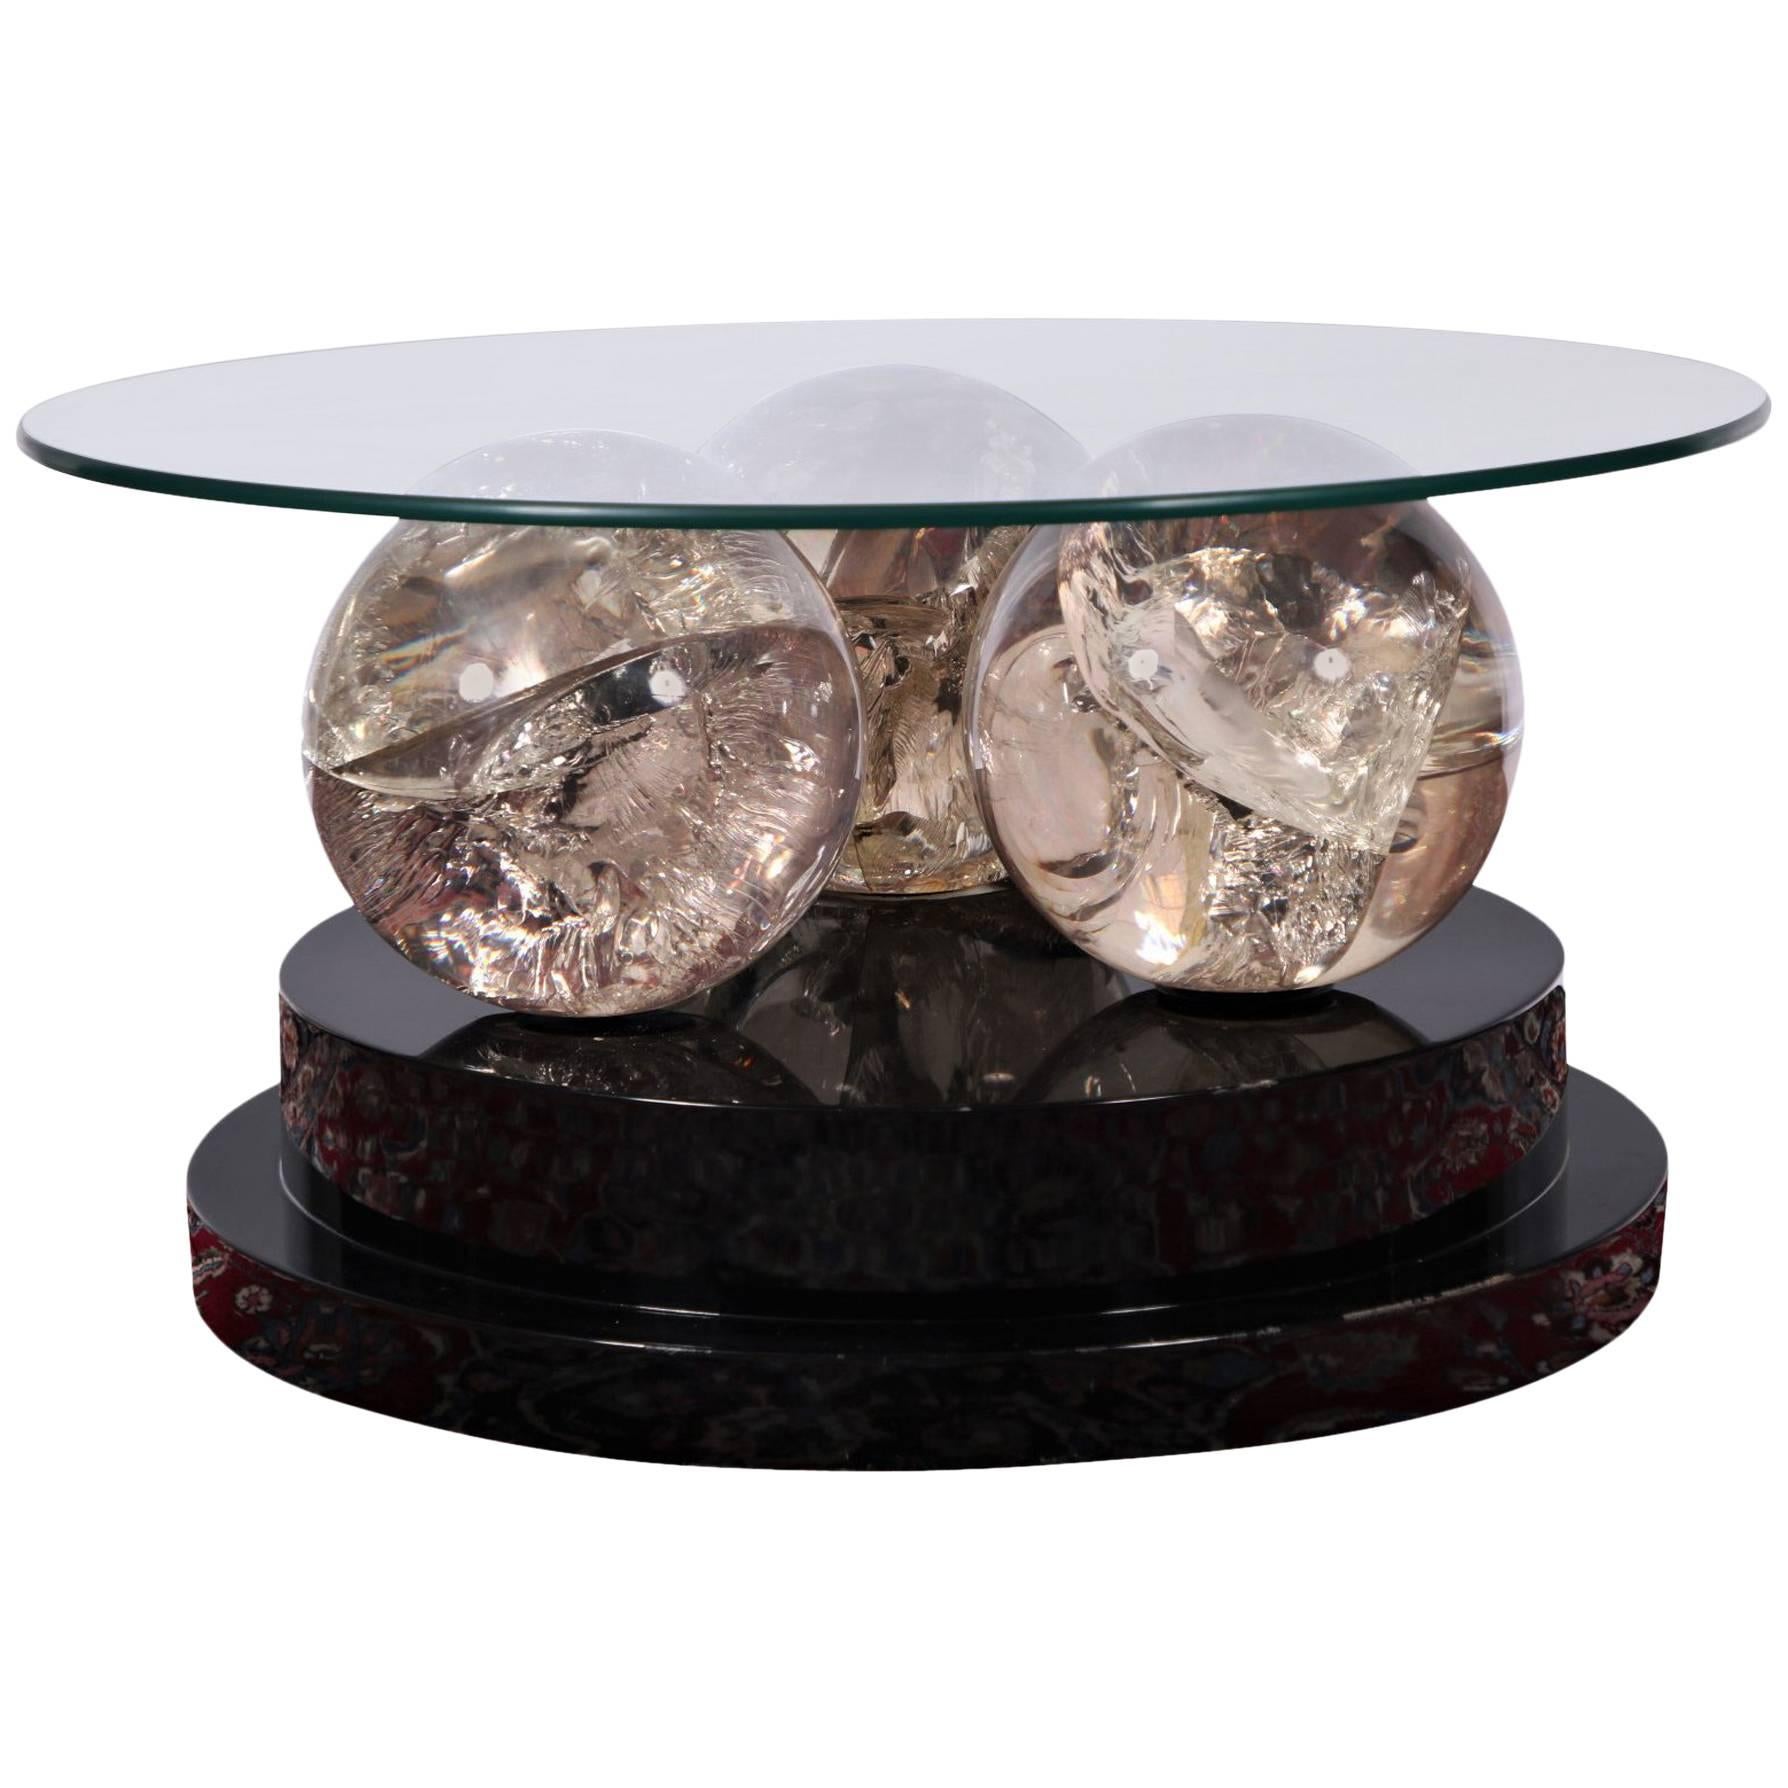 Moderrn Round Lucite and Lacquer Coffee Table